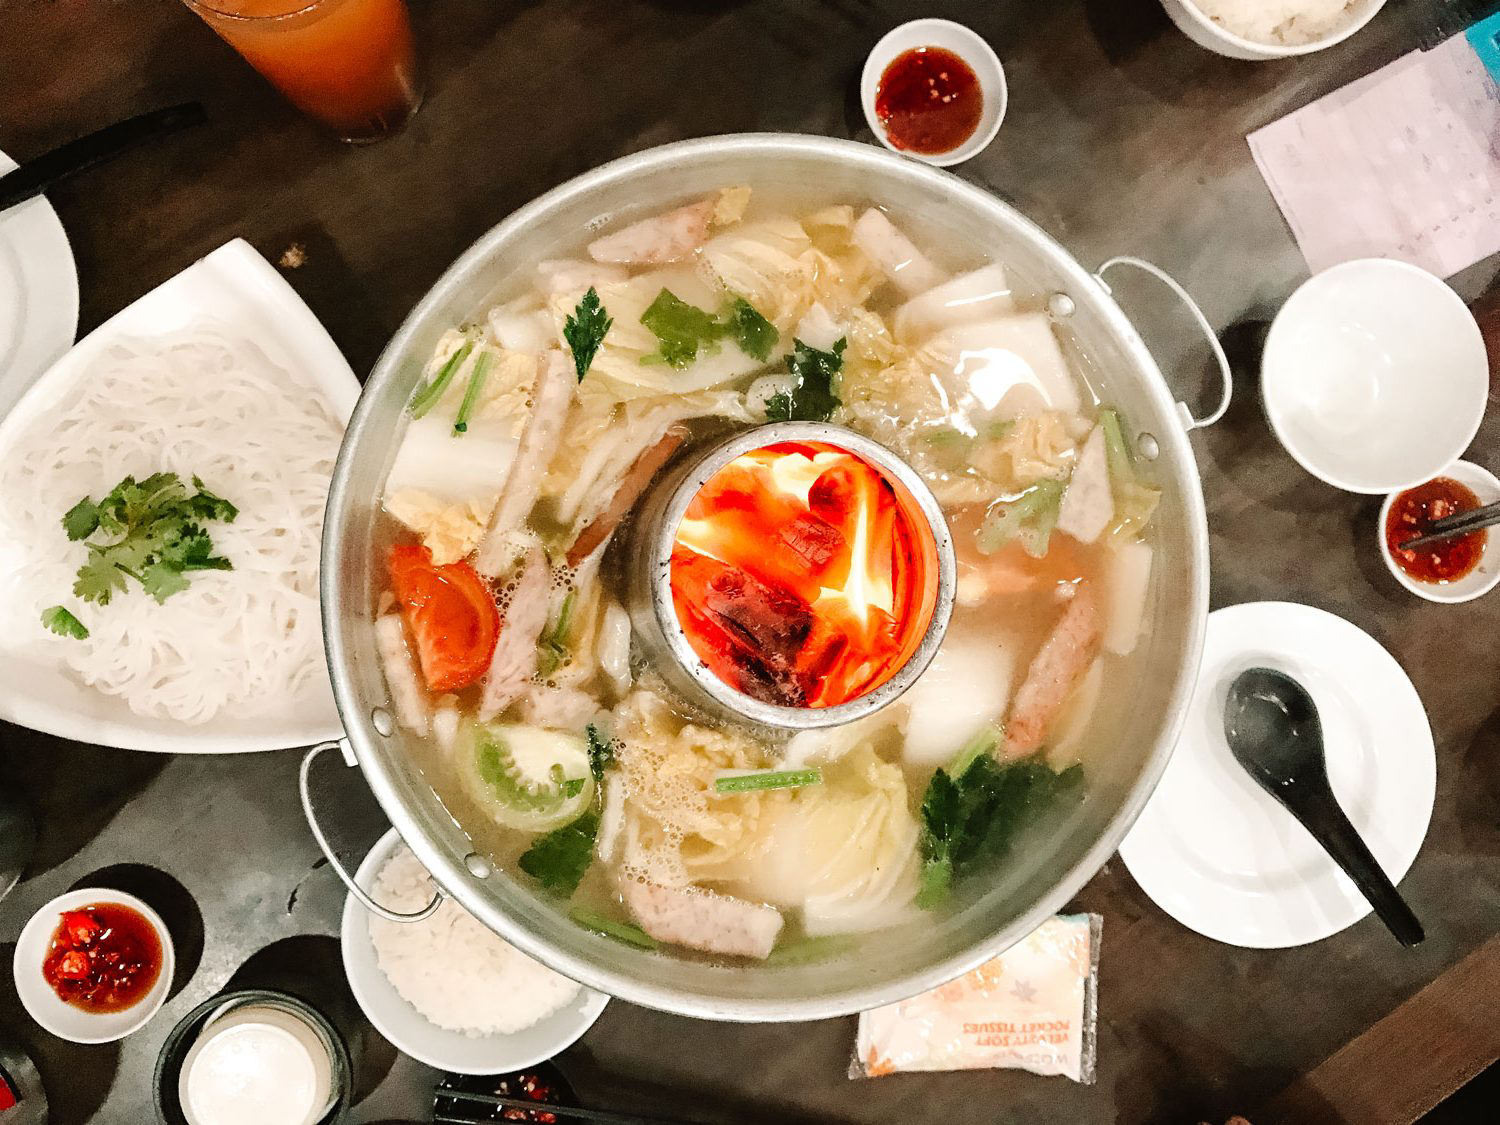 A large non-spicy steamboat in the center of the table.